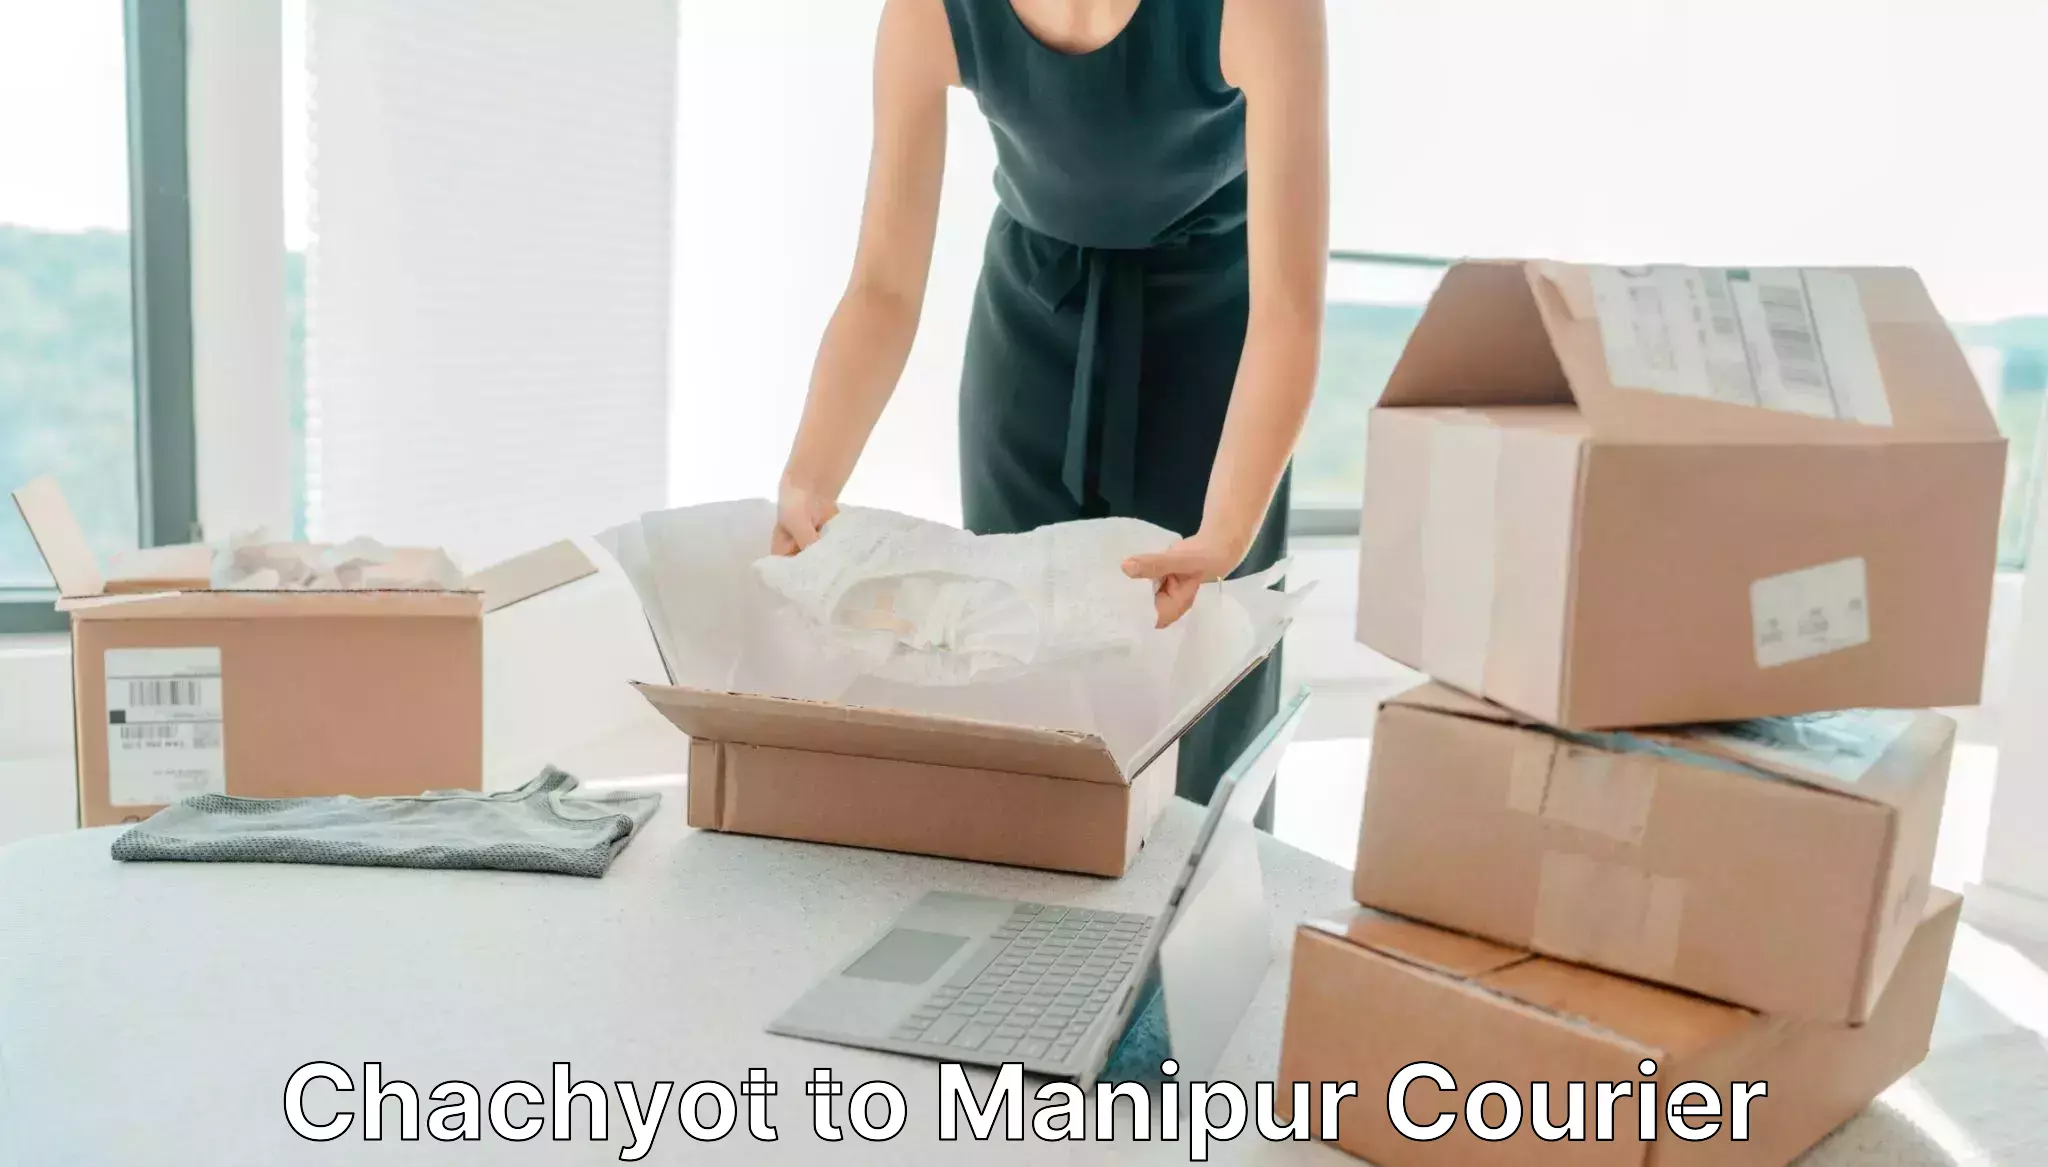 Streamlined logistics management Chachyot to Manipur